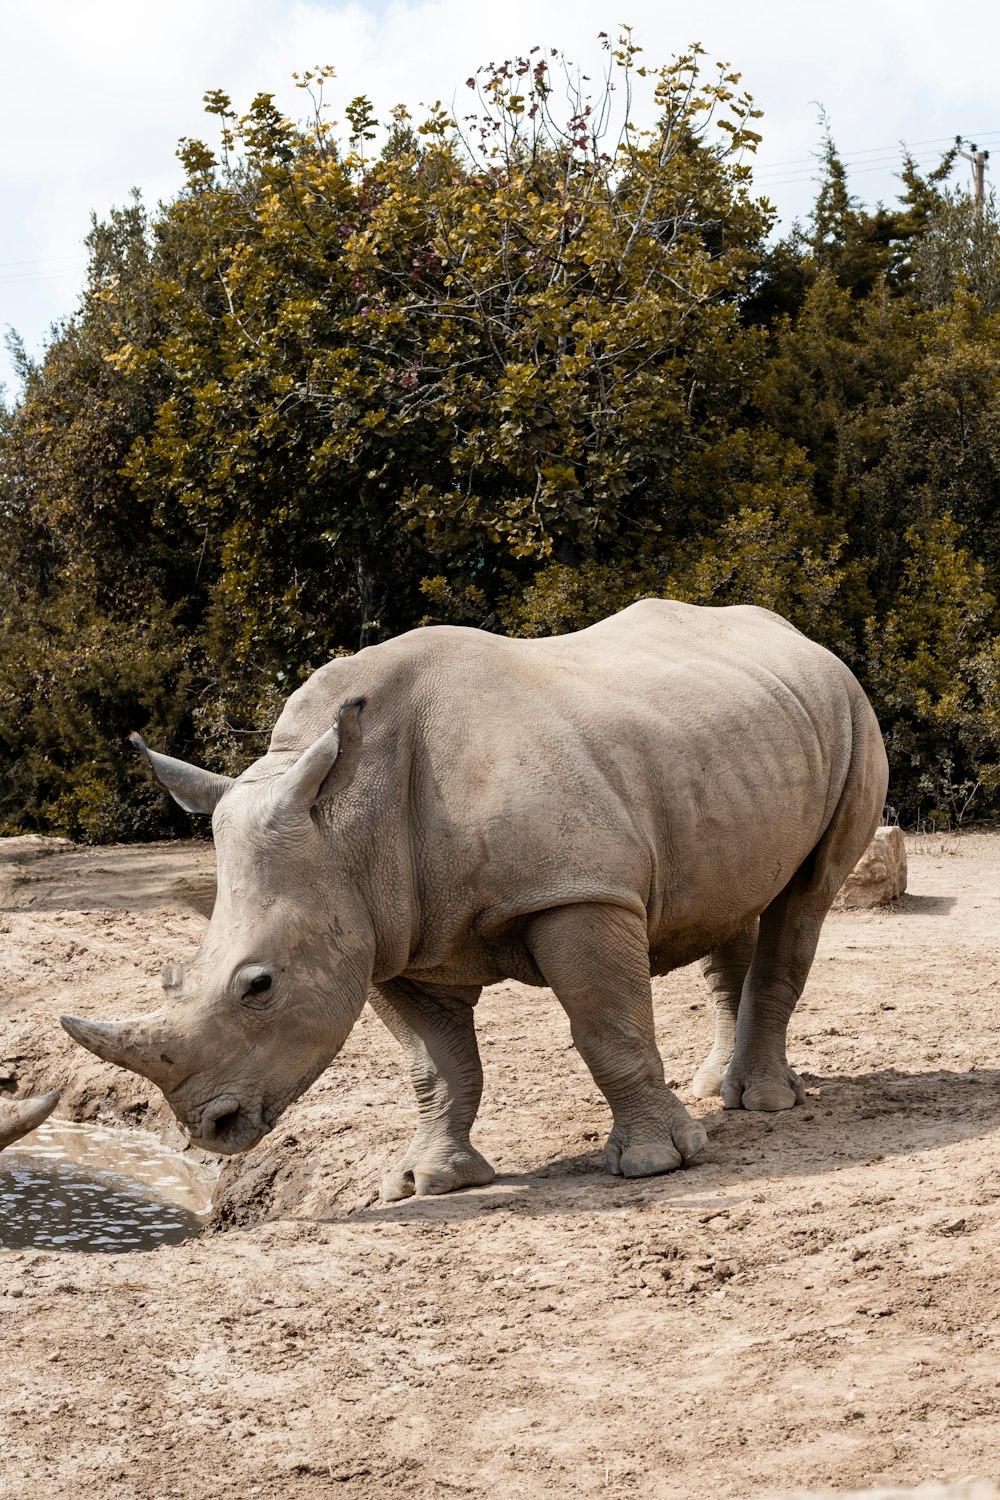 a rhino standing on top of a dirt field